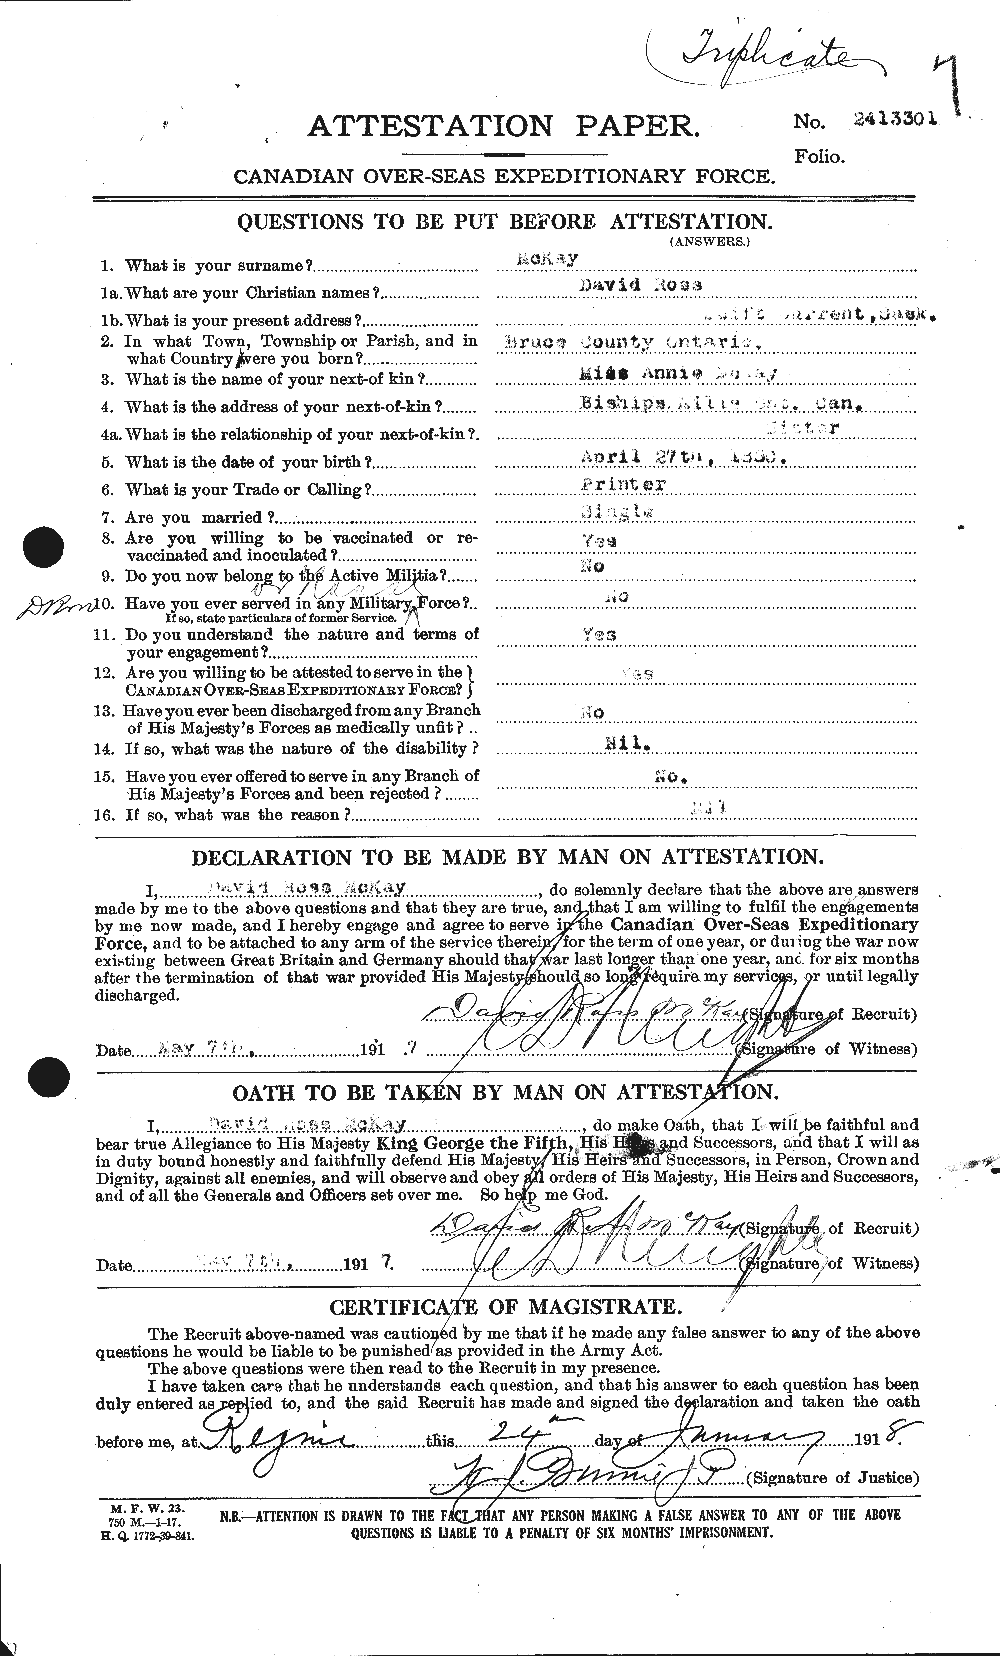 Personnel Records of the First World War - CEF 531142a